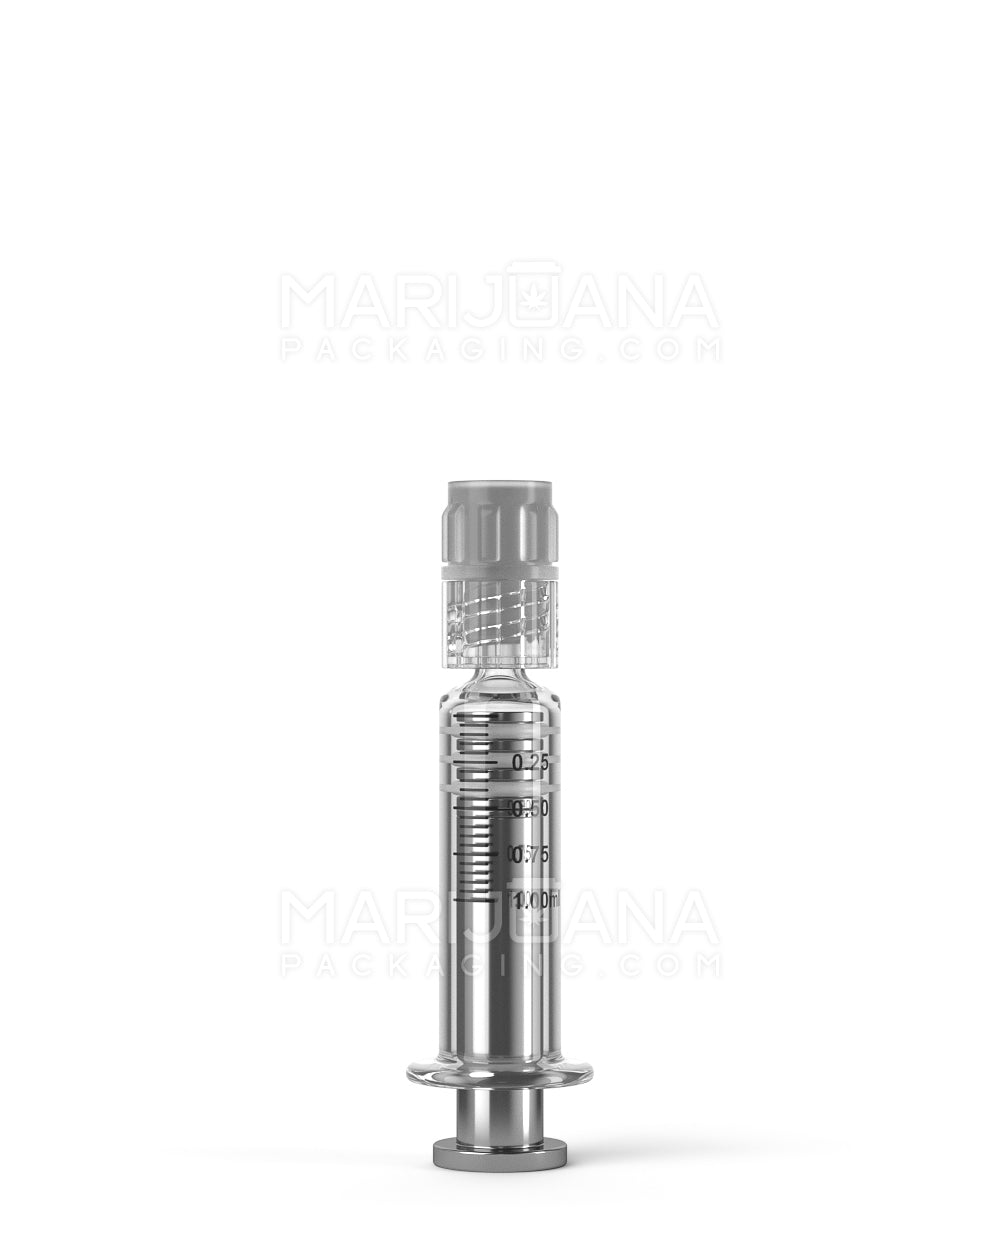 Luer Lock | Glass Dab Applicator Syringes w/ Metal Plunger | 1mL - 0.25mL Increments - 100 Count - 8